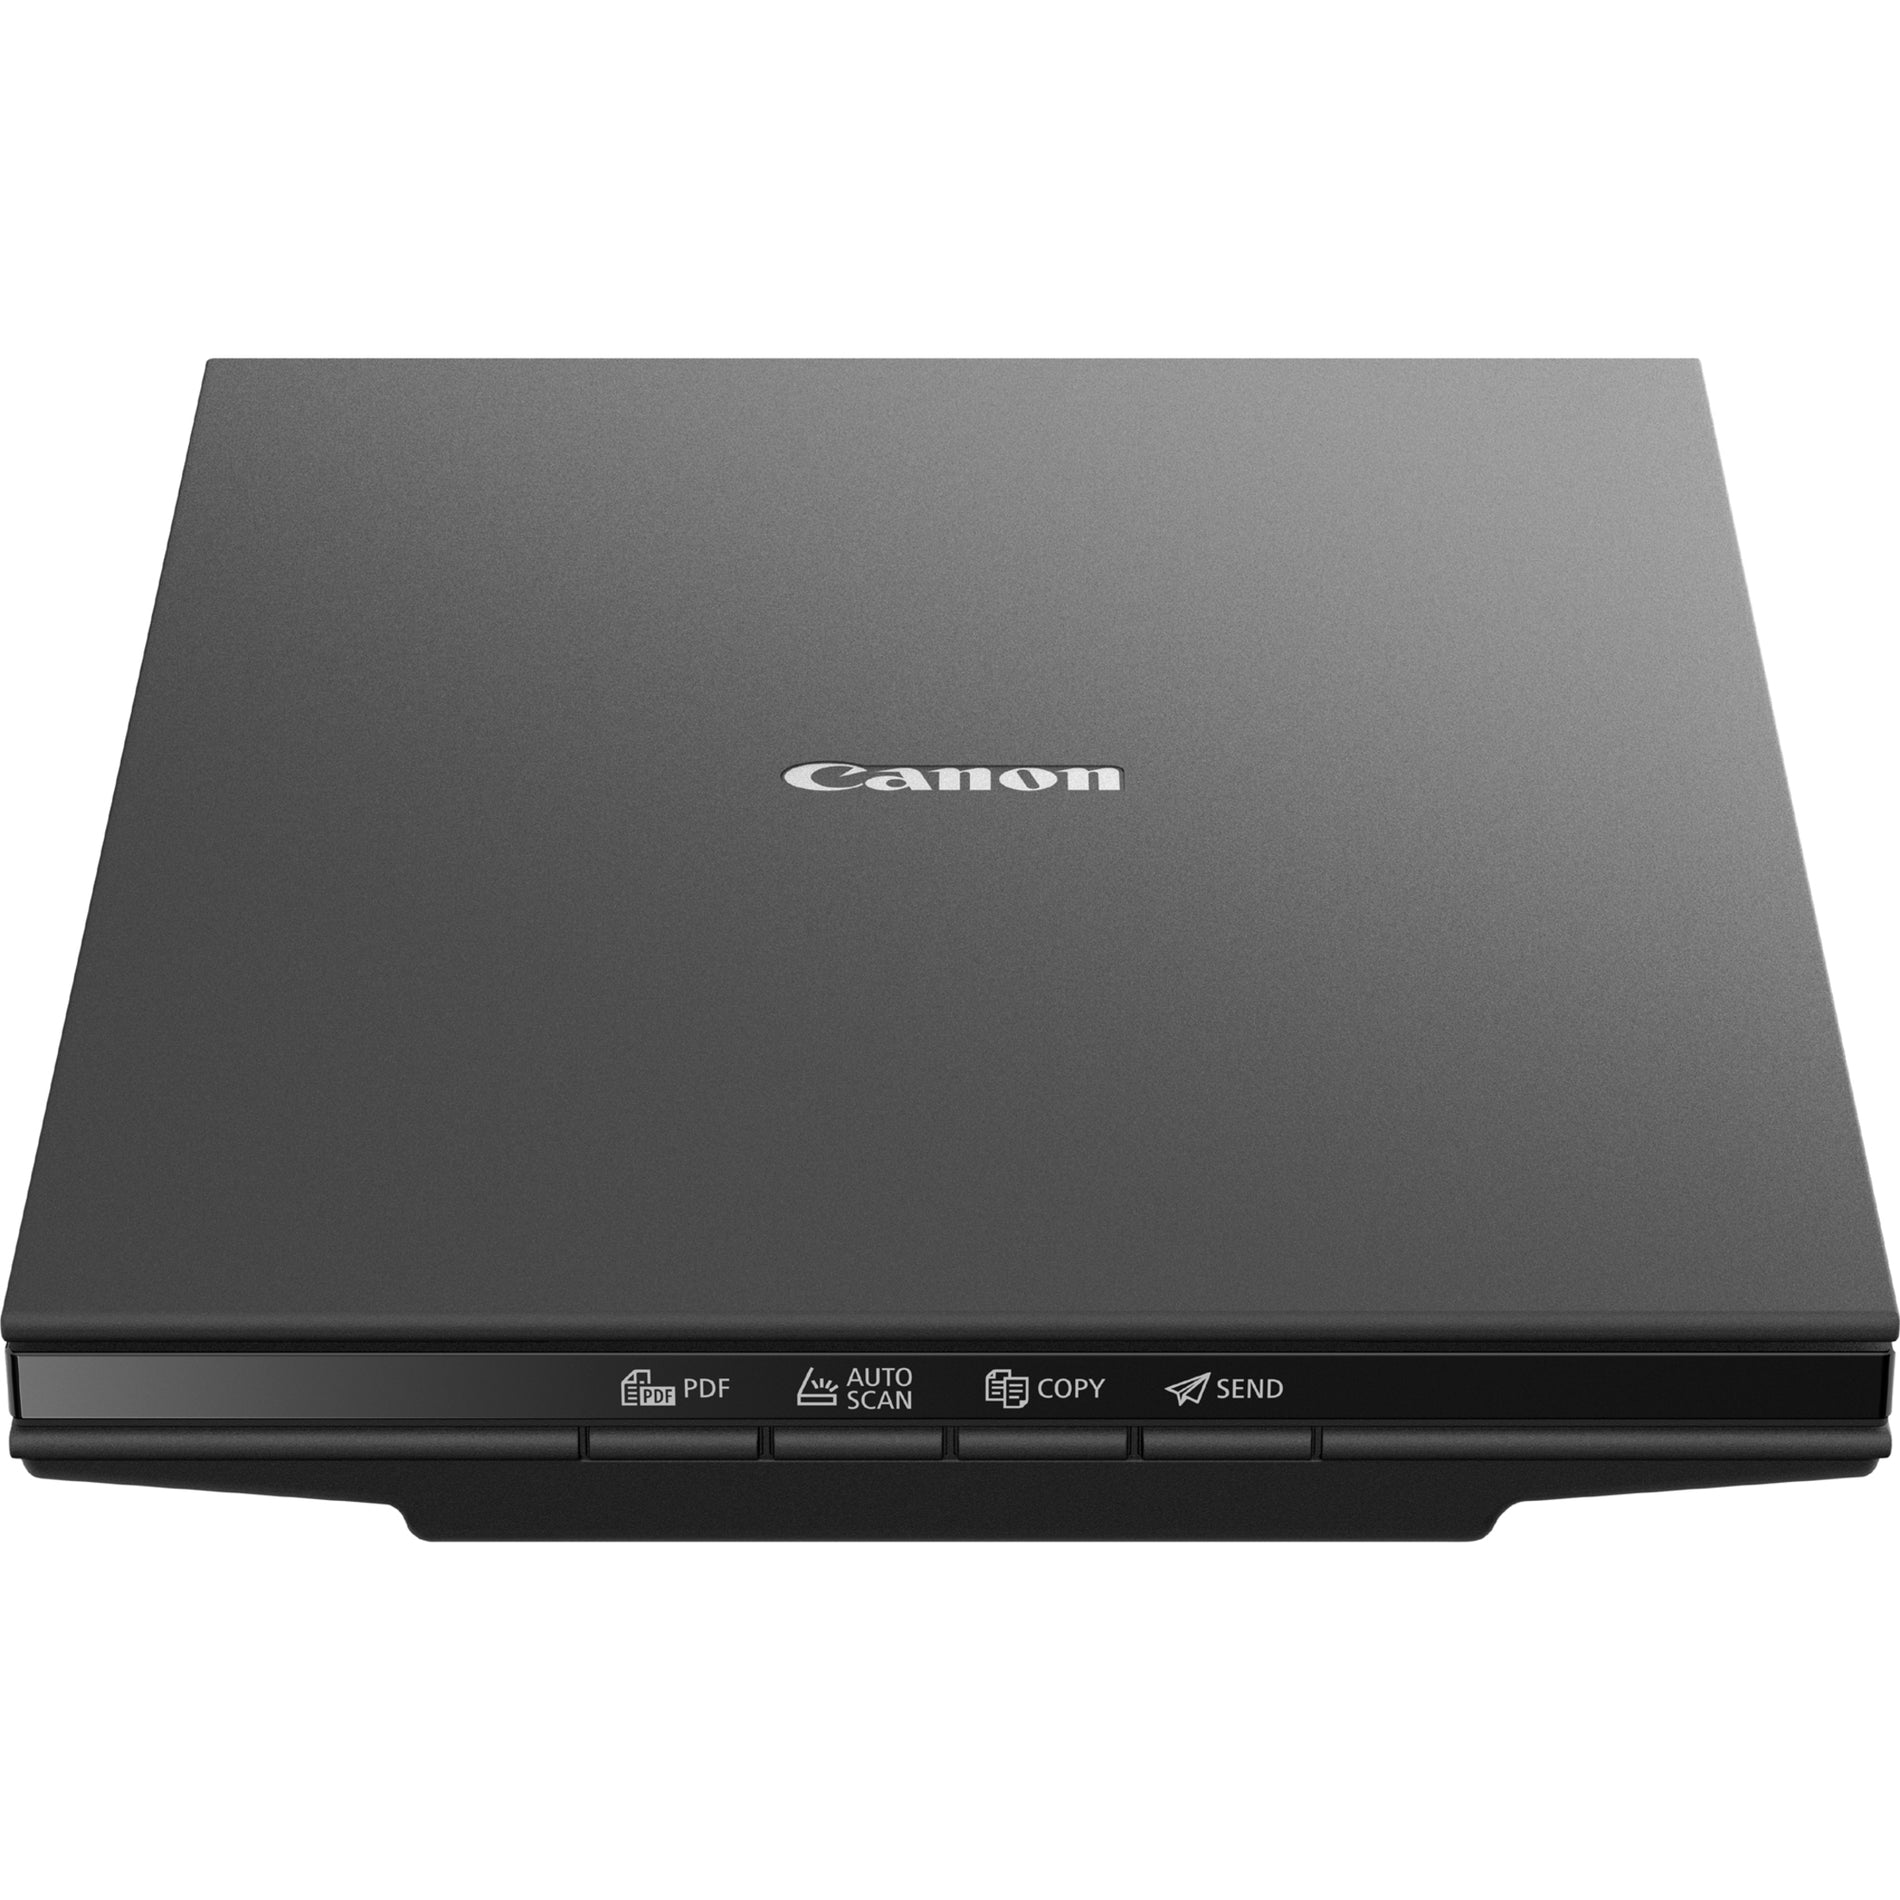 Canon 2995C002 CanoScan LiDE 300 Flatbed Scanner - High Resolution Scanning, USB Connectivity